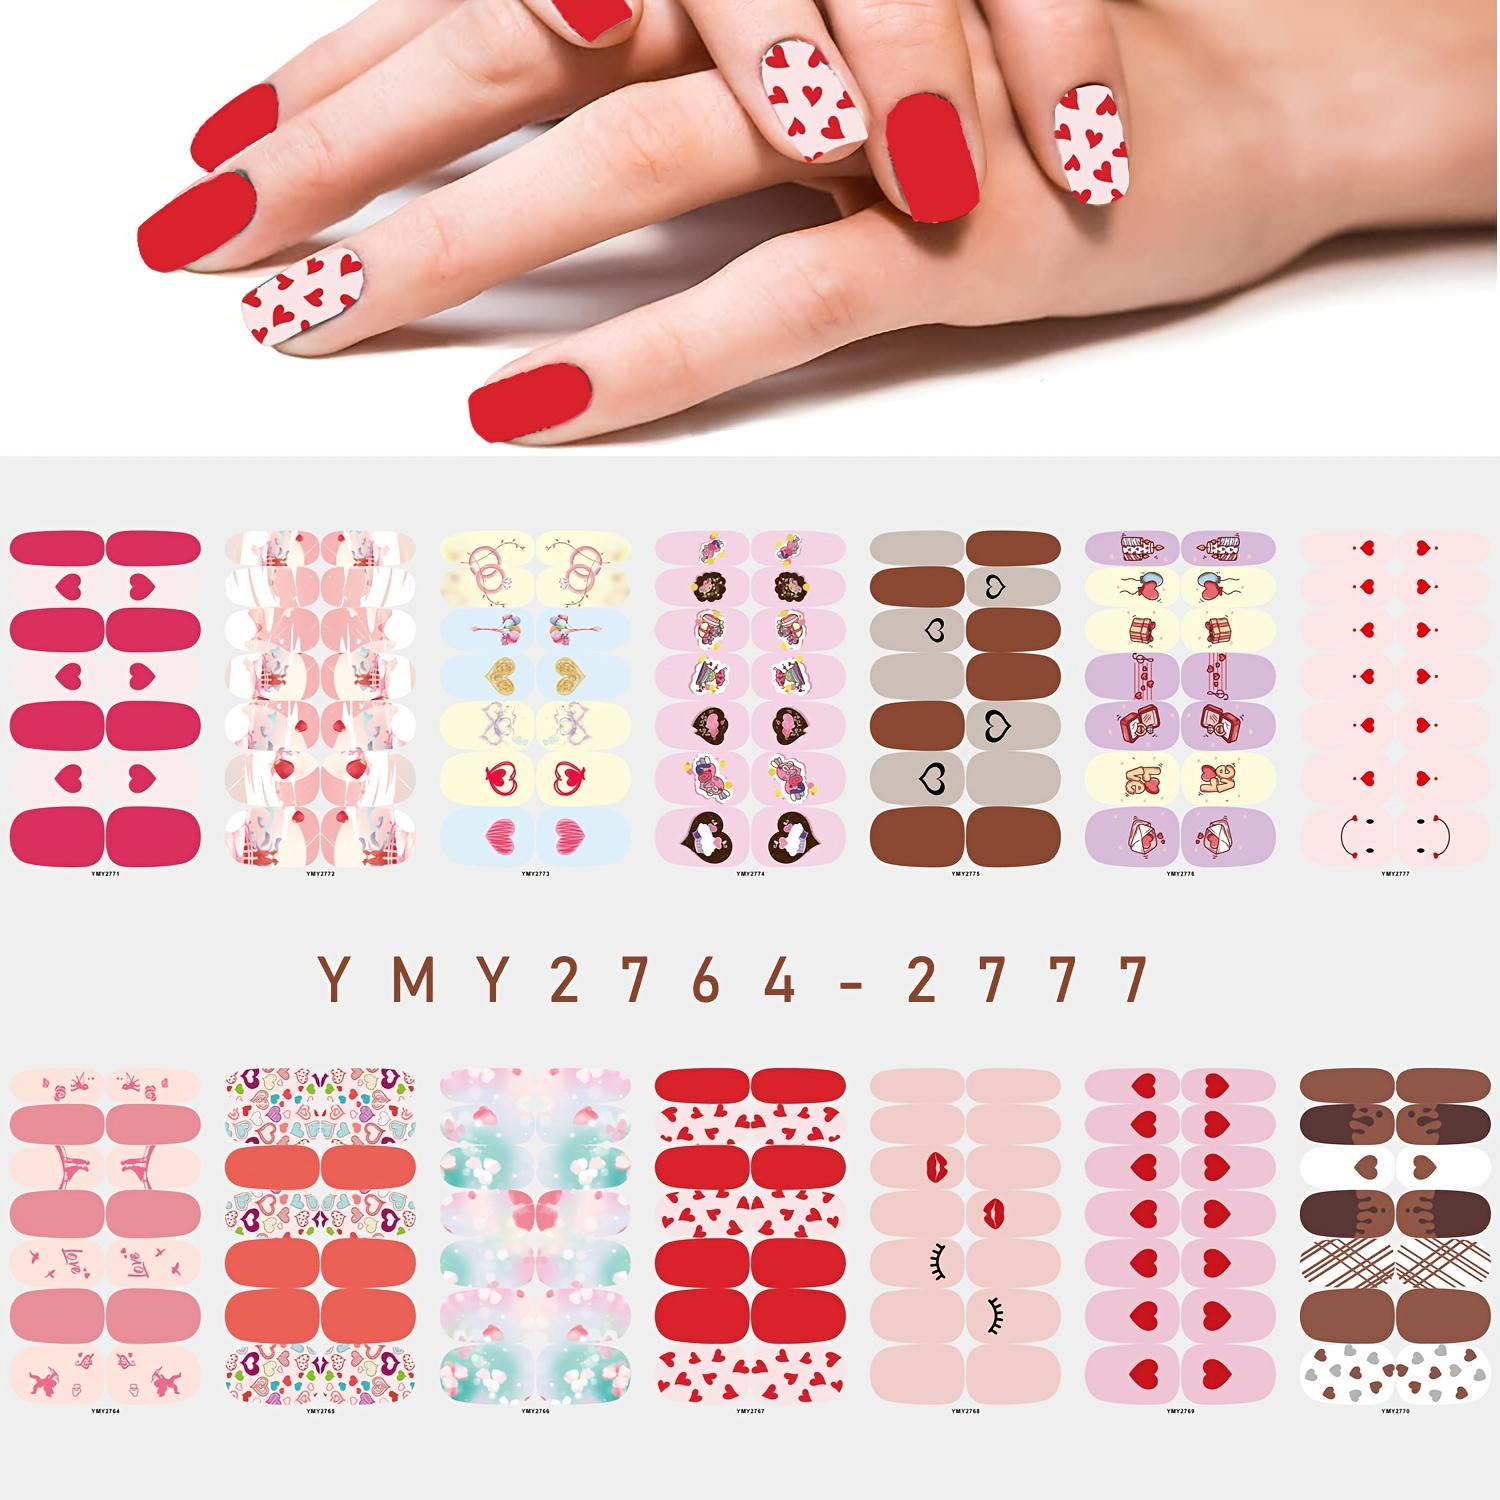  Valentine's Day Nail Art Stickers Decals 3D Self-Adhesive  Exquisite Fashion Cartoon Design Nail Decals Valentine's Day Love Heart Nail  Art Supplies Romantic Cute Valentine's Day Nail Decoration DIY Acrylic Nail  Art